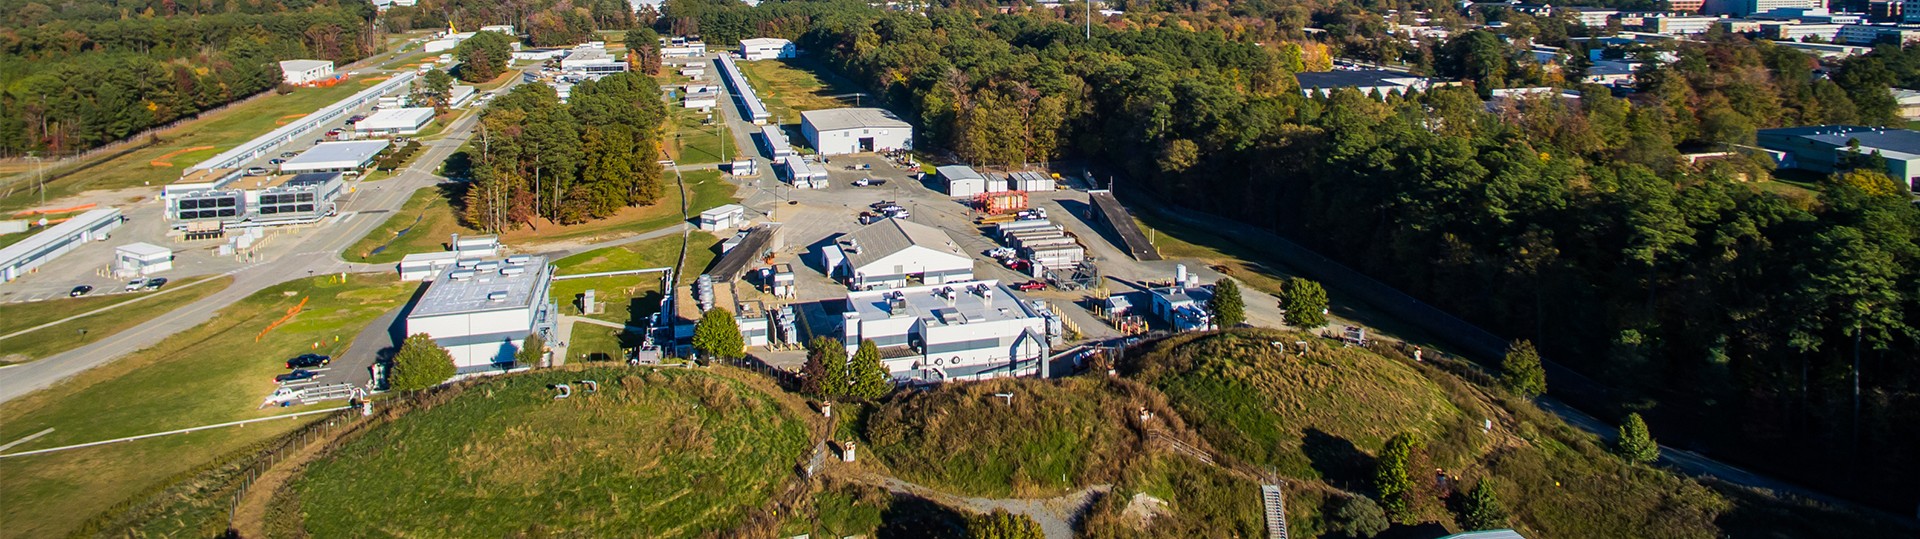 Aerial photo of the Continuous Electron Beam Accelerator Facility, showing the above-ground accelerator service buildings, which outline the accelerator's racetrack shape. The three round domes of the Experimental Halls A, B and C are in the foreground, and the Experimental Hall D complex is in the top left corner of the photo.